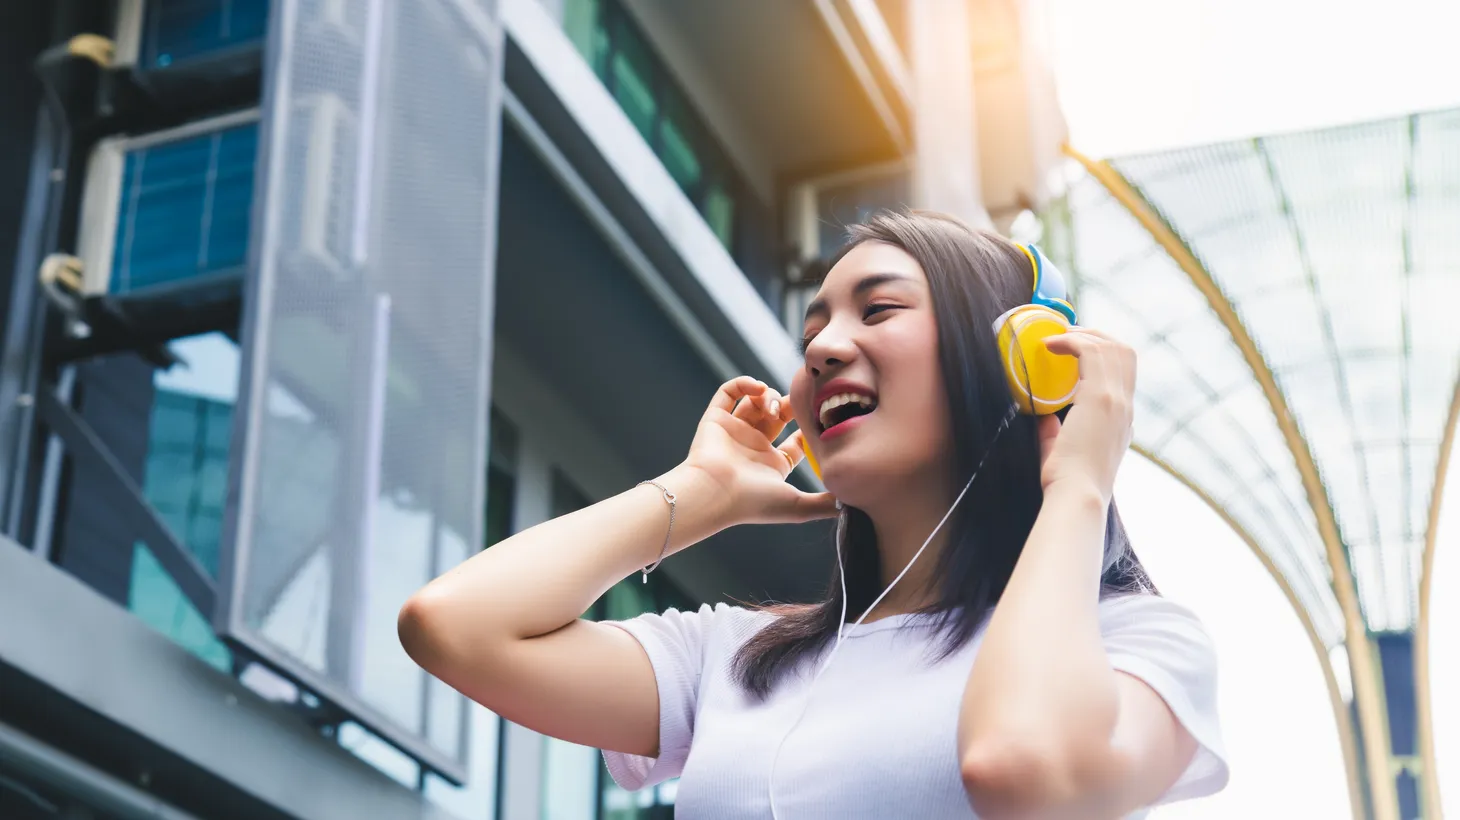 “Your psychological response to music has surprisingly little to do with the music itself, and more of A) the vibes, for lack of a better word, that that evokes in your own head,” says NYU Clinical Associate Professor Pascal Wallisch.